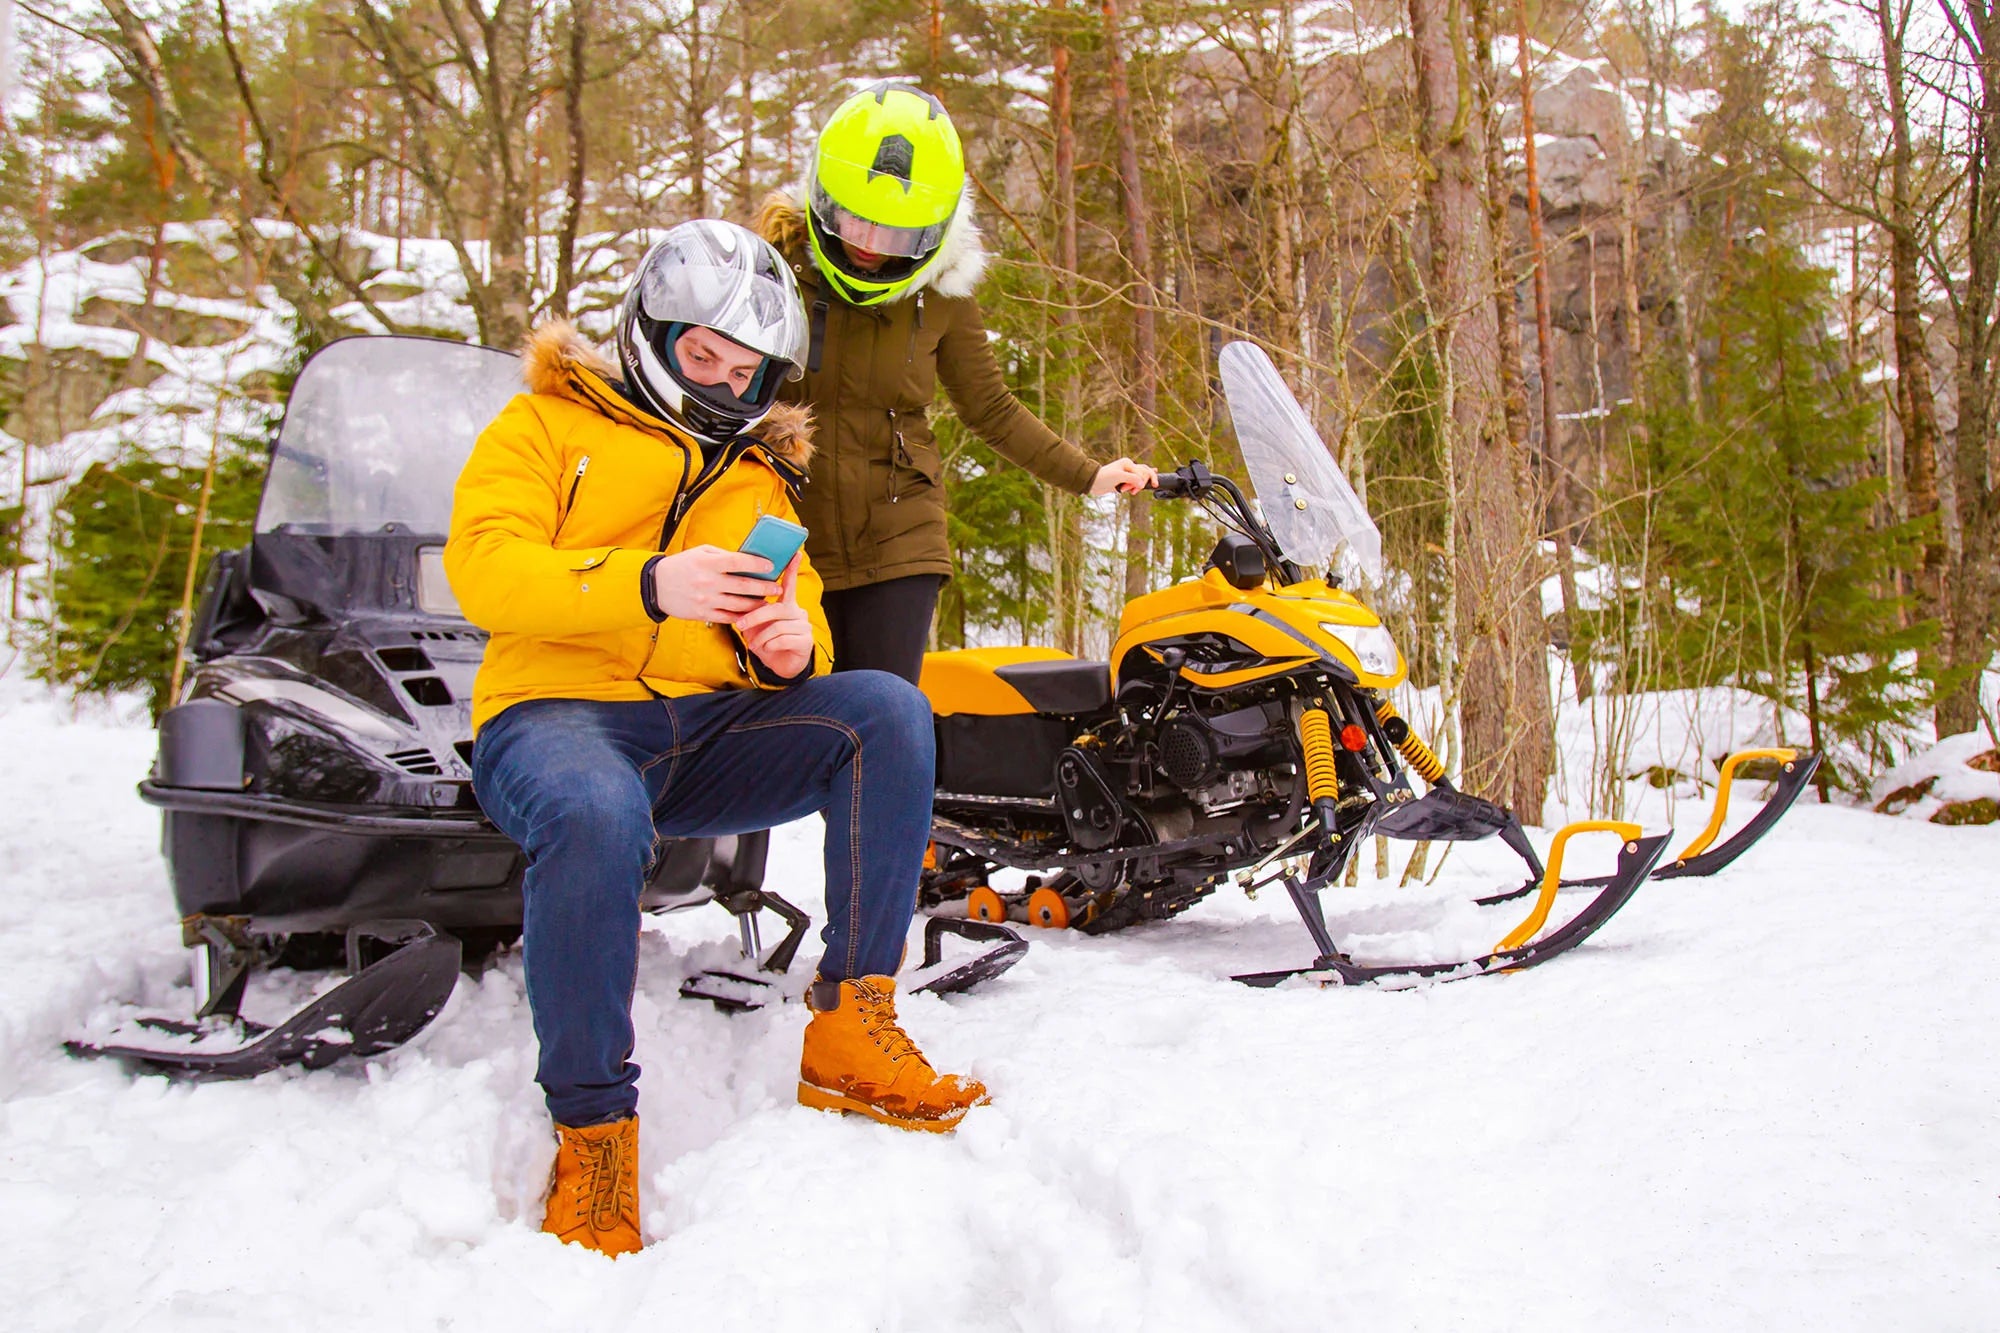 Snowmobiling couple taking a break to check the map on a cell phone